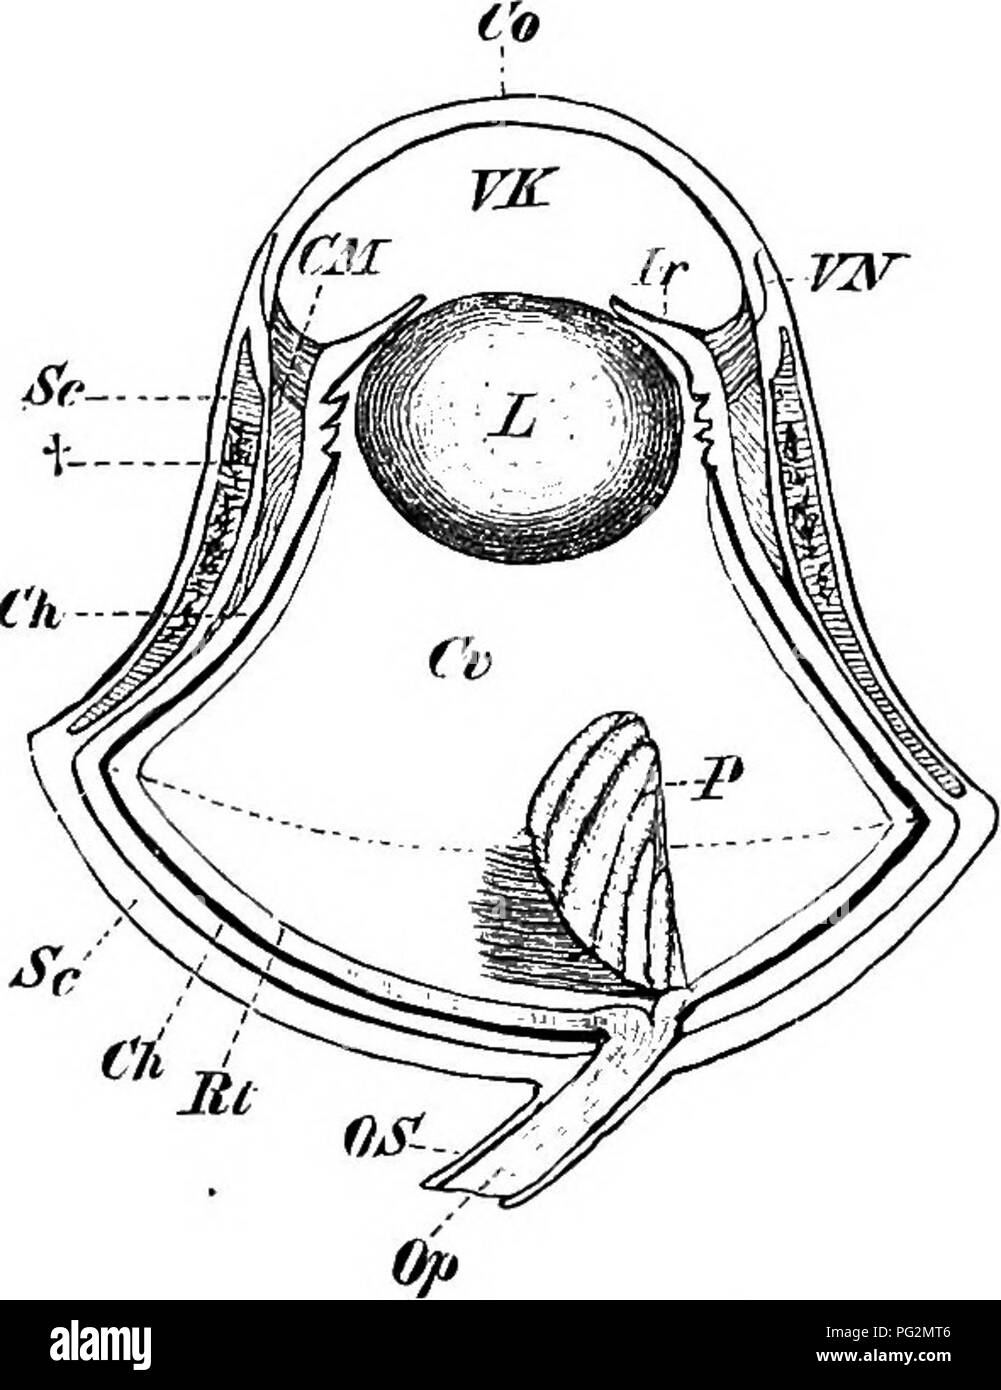 . Elements of the comparative anatomy of vertebrates. Anatomy, Comparative. Fig. 170. — Eye OP Lacerta niu- ralis, SHOWING THE Ring of Bony Sclero- tic Plates.. Fig. 171.—Eye of an Owl. Rt, retina ; Ch, Choroid; Sc, sclerotic, with its bony ring at t : CM, ciliary muscle; Co, cornea; VN, point of jvmction between sclerotic and cornea ; Jr, iris; VK, anterior chamber; L, lens ; Cr, vitreous humour ; P, pecten; Op, OS, optic nerve and sheath. The dotted line passing across the broadest portion of the circumference of the eye divides the latter into an inner and an outer segment. outer portion is Stock Photo